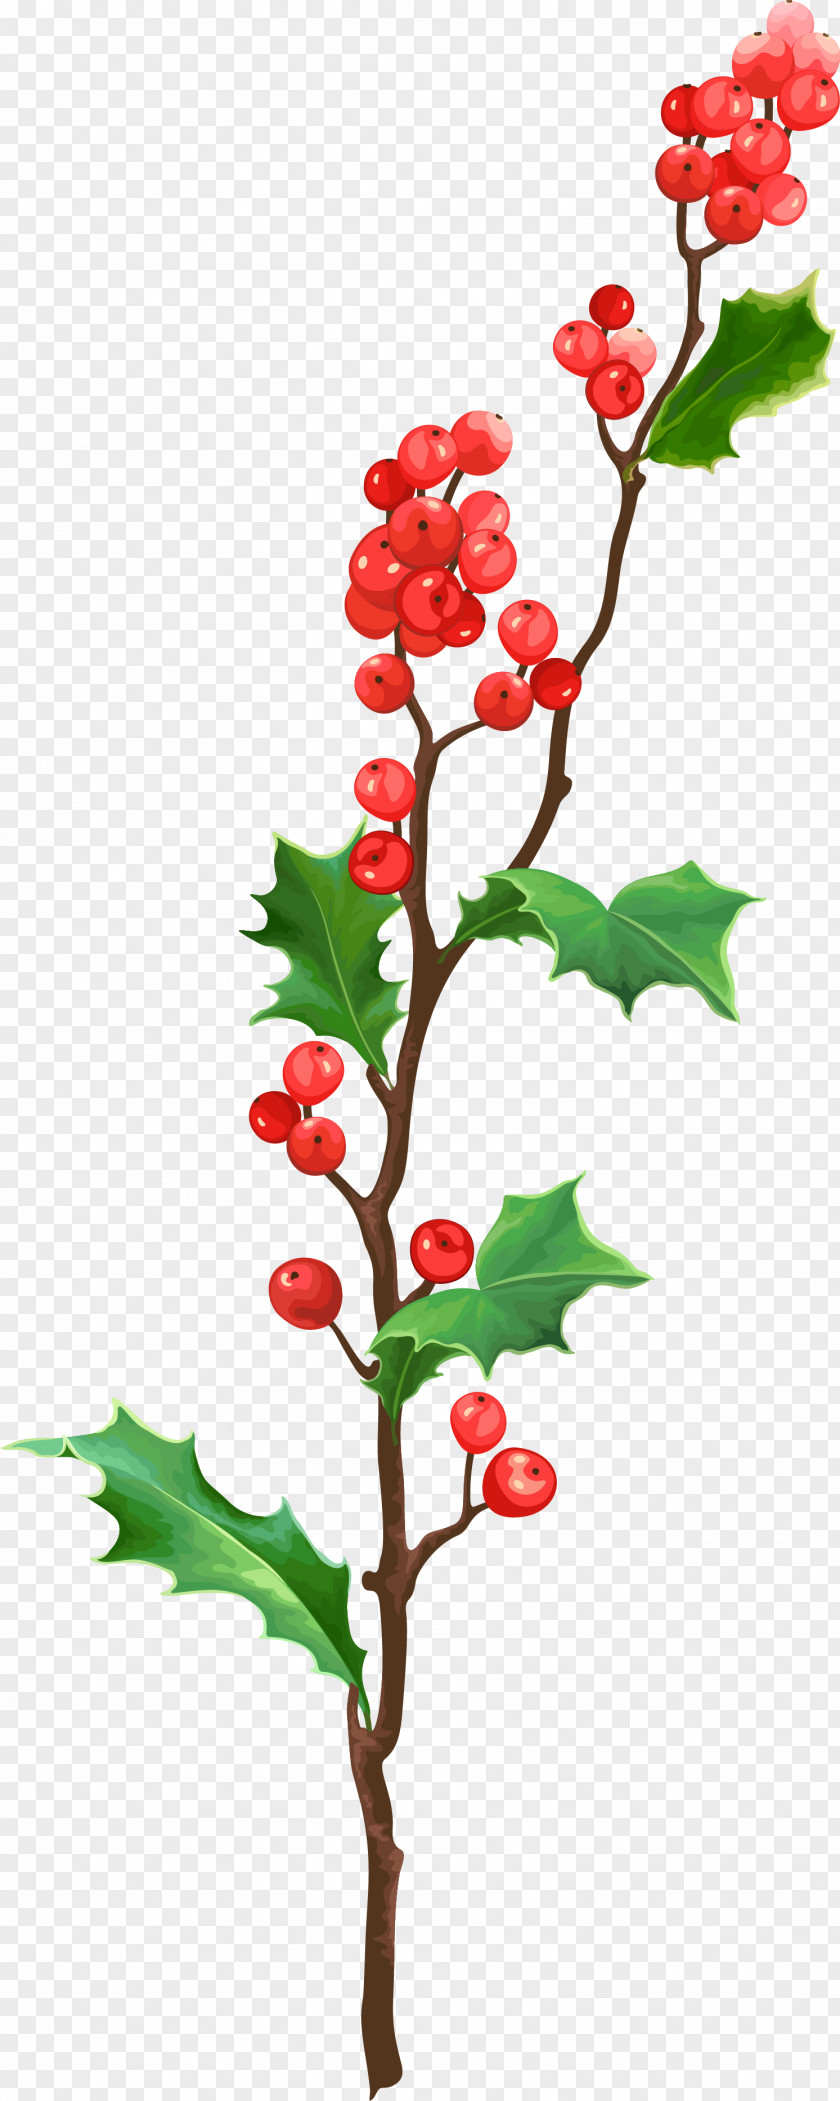 Christmas Plant Material PNG